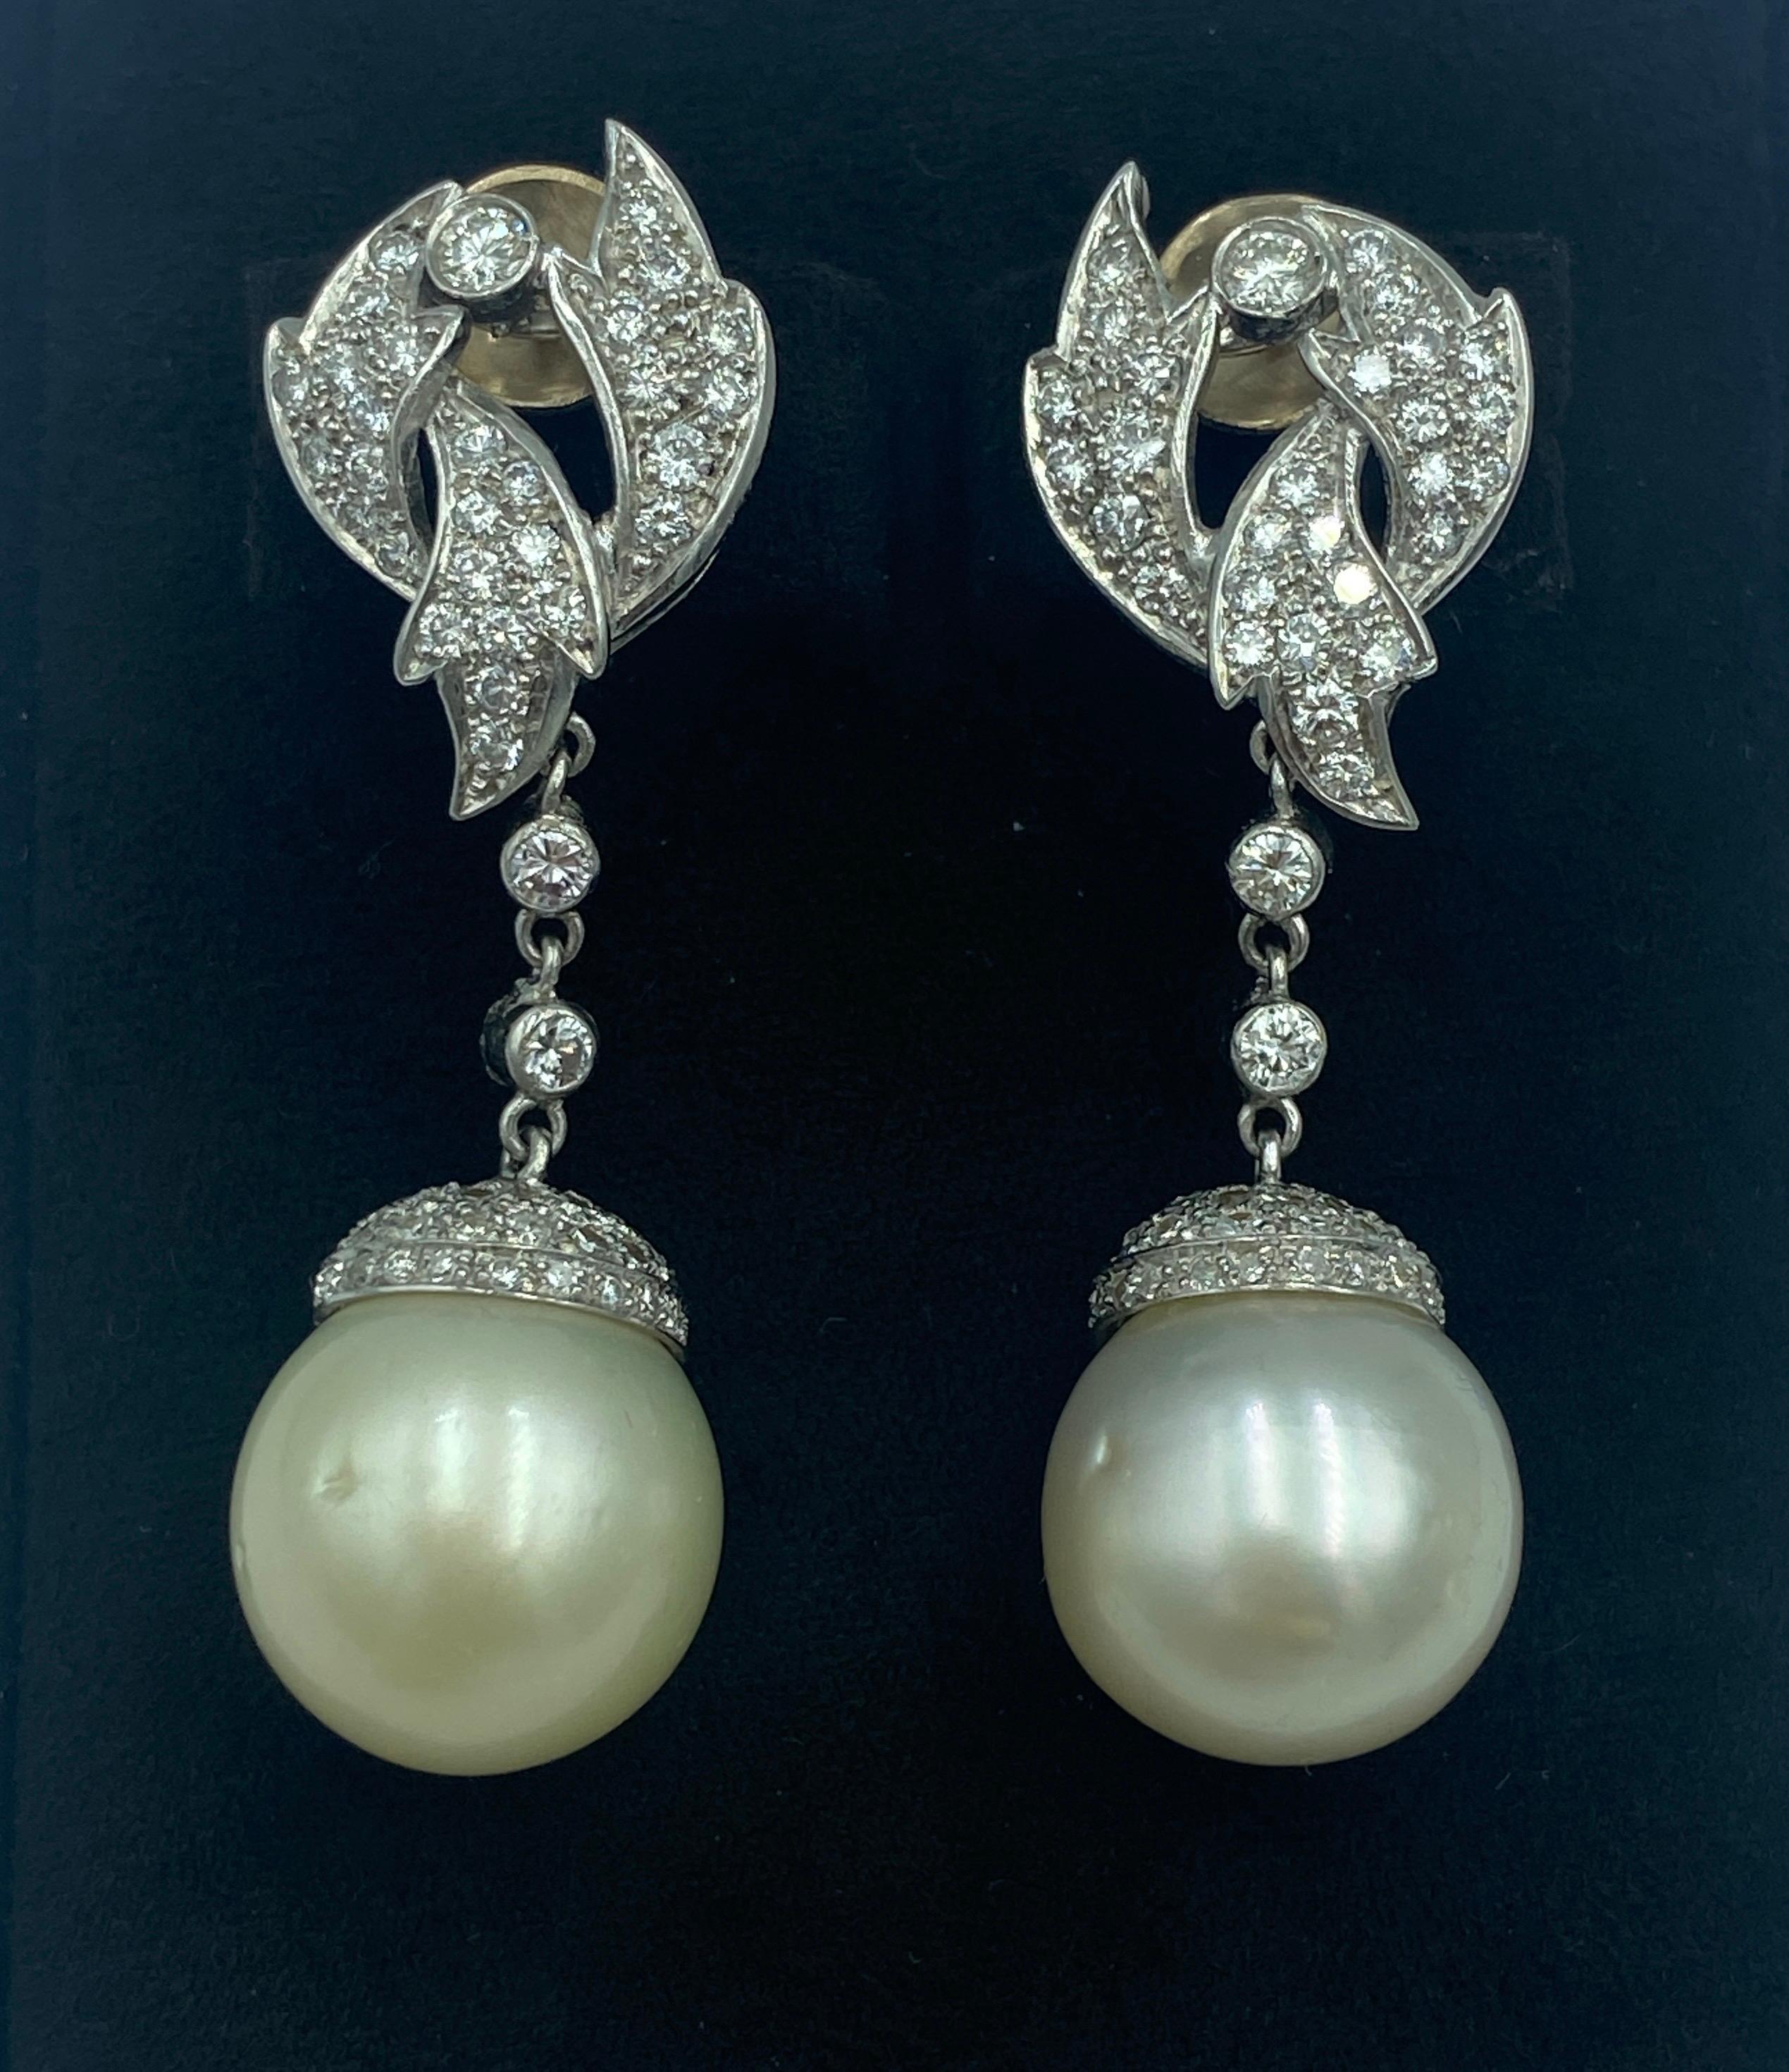 These 1940s French platinum, diamond and pearl dangle earrings are clip-on earrings but a post can easily be attached to them. The pearls are South Sea natural pearls and their diameter is 16 mm. There is approximately 3 carats of diamonds on these